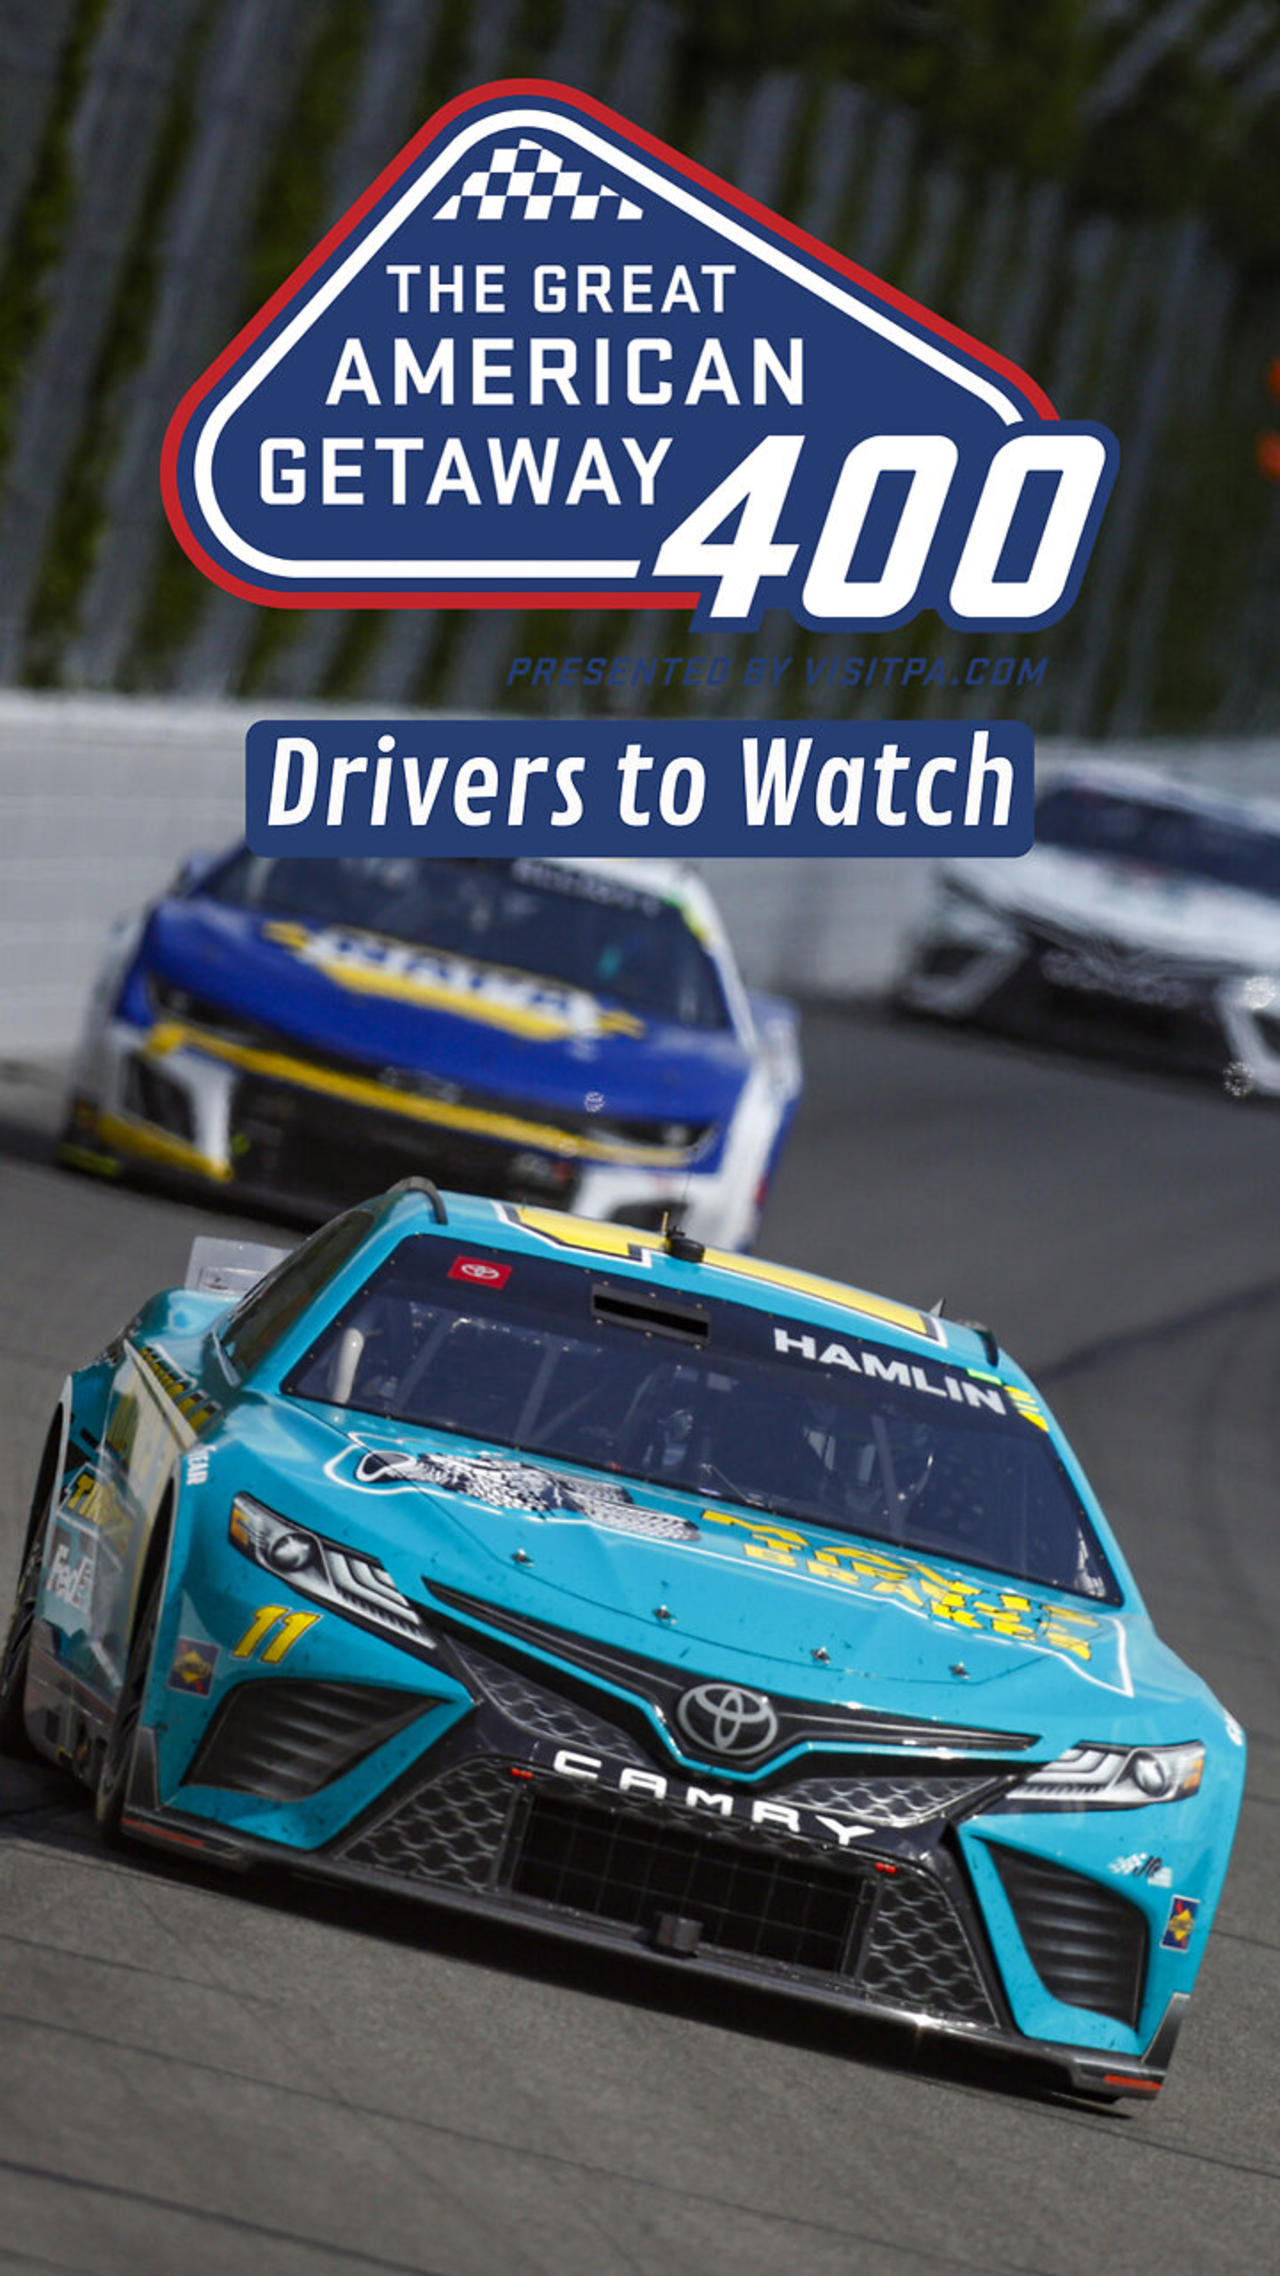 NASCAR Drivers to Watch for in The Great American Getaway 400